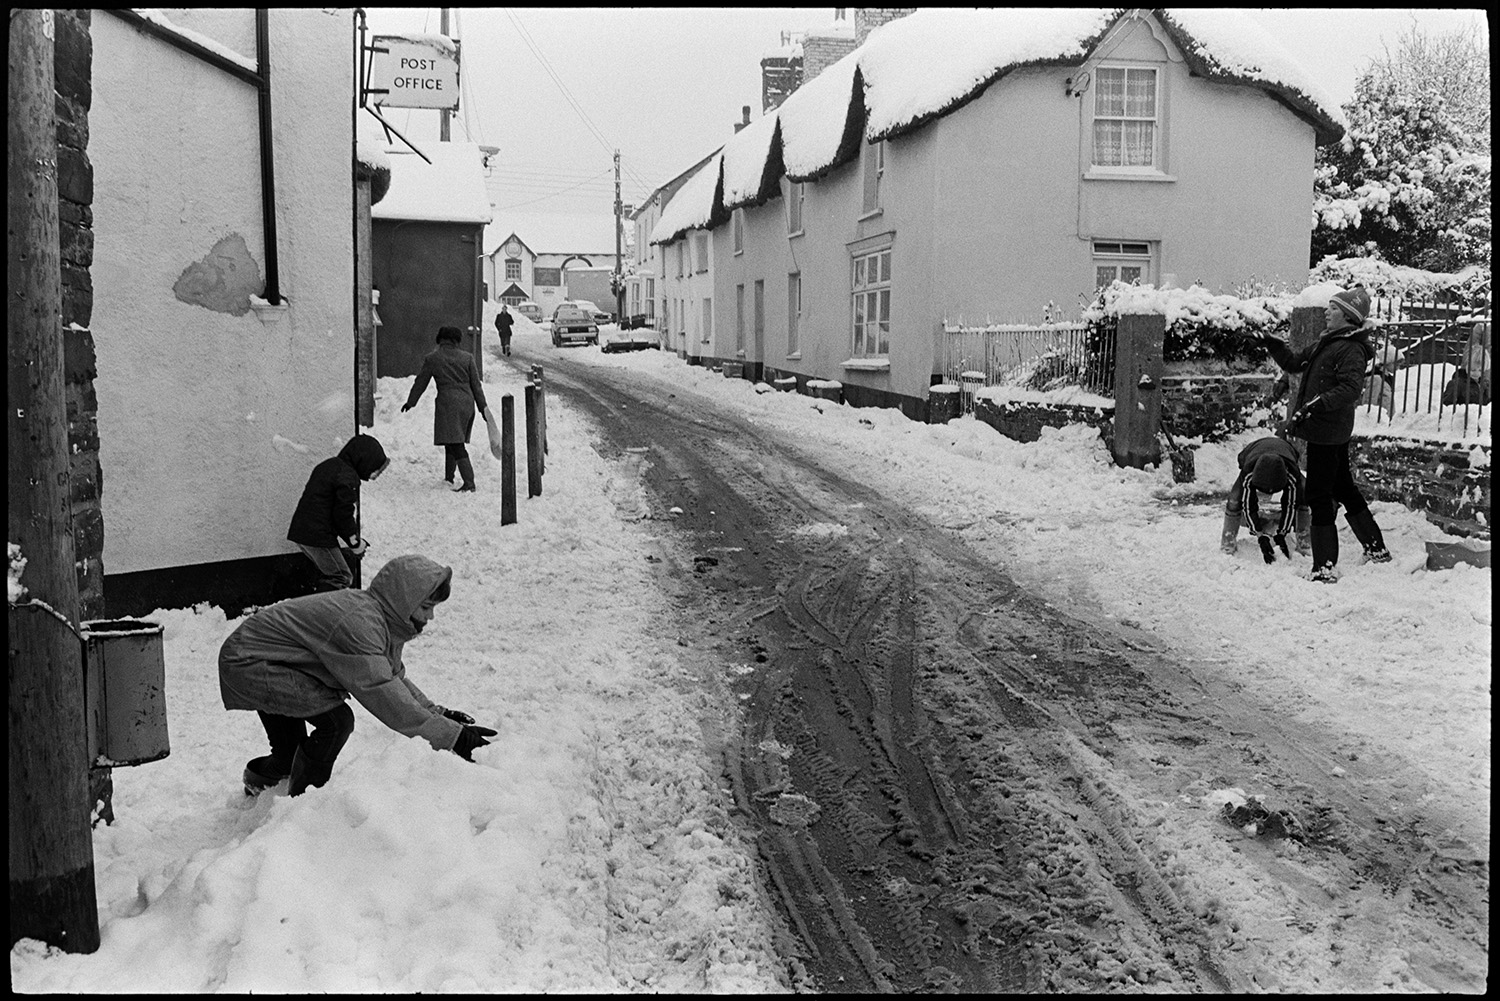 Snow, snowball fight in village street.
[A snowball fight between four children in the Fore Street near the post office in Dolton. The thatched cottage roofs and the road are covered in snow.]